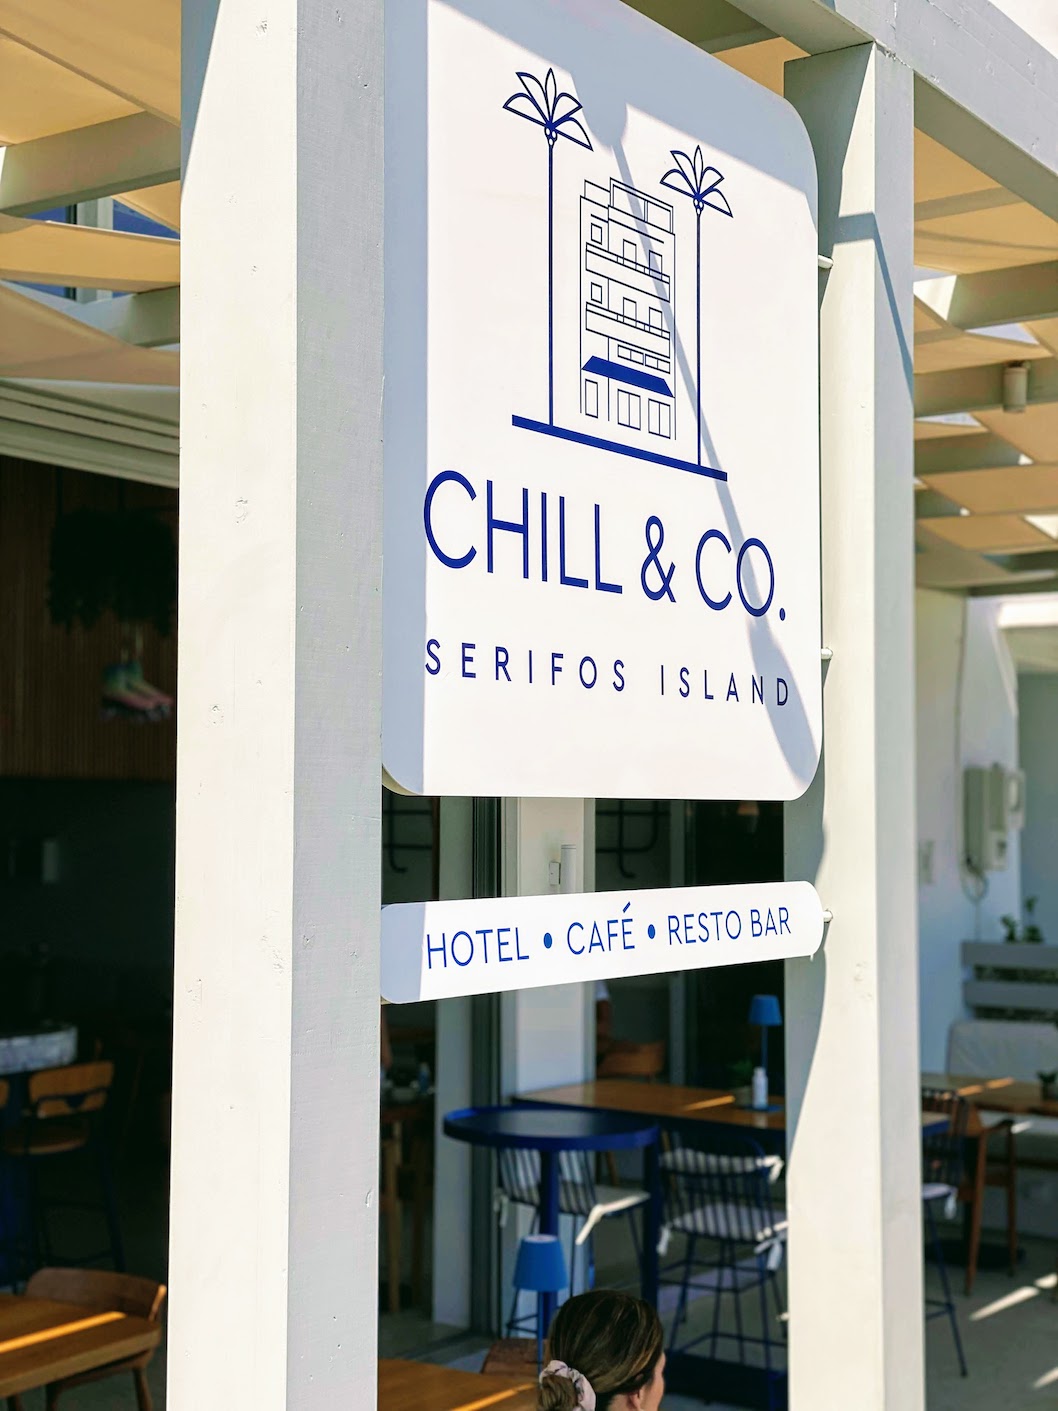 Travel Food People - Chill & Co, Serifos